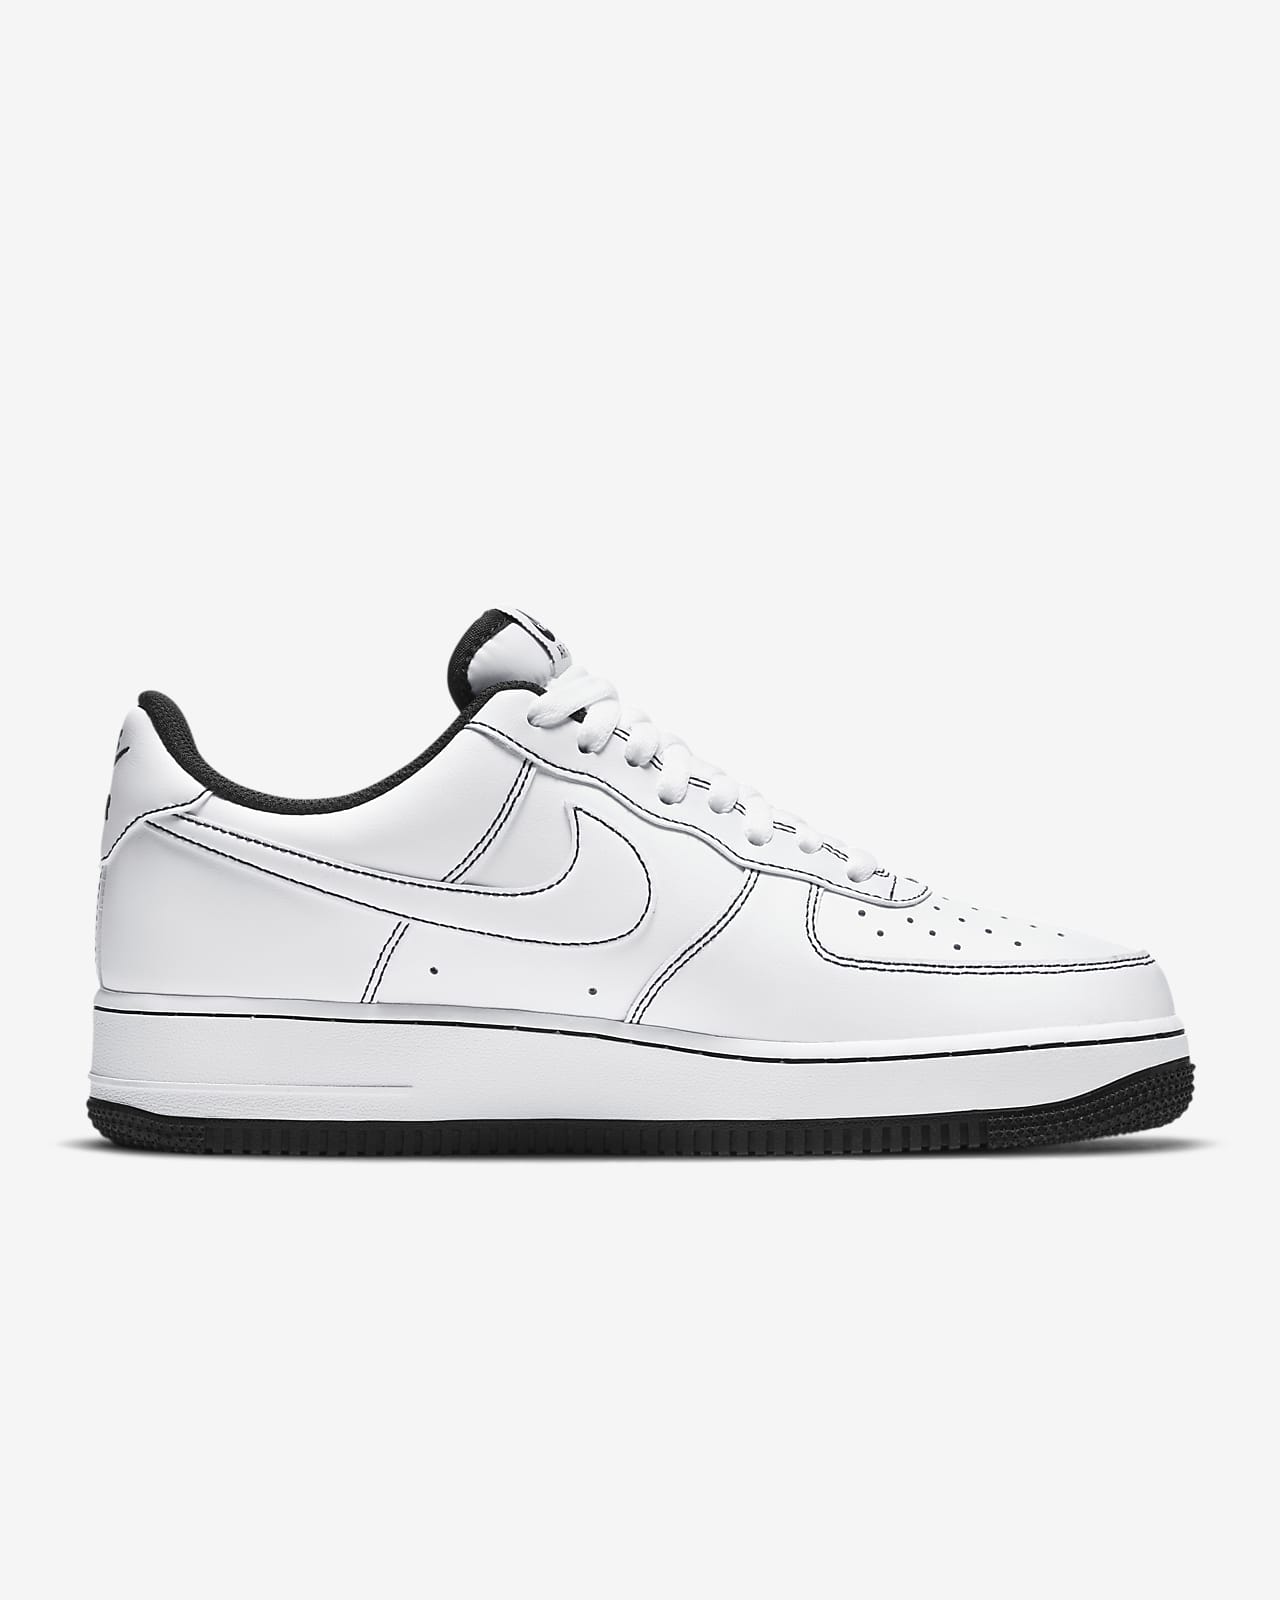 white nike shoes that look like air force ones